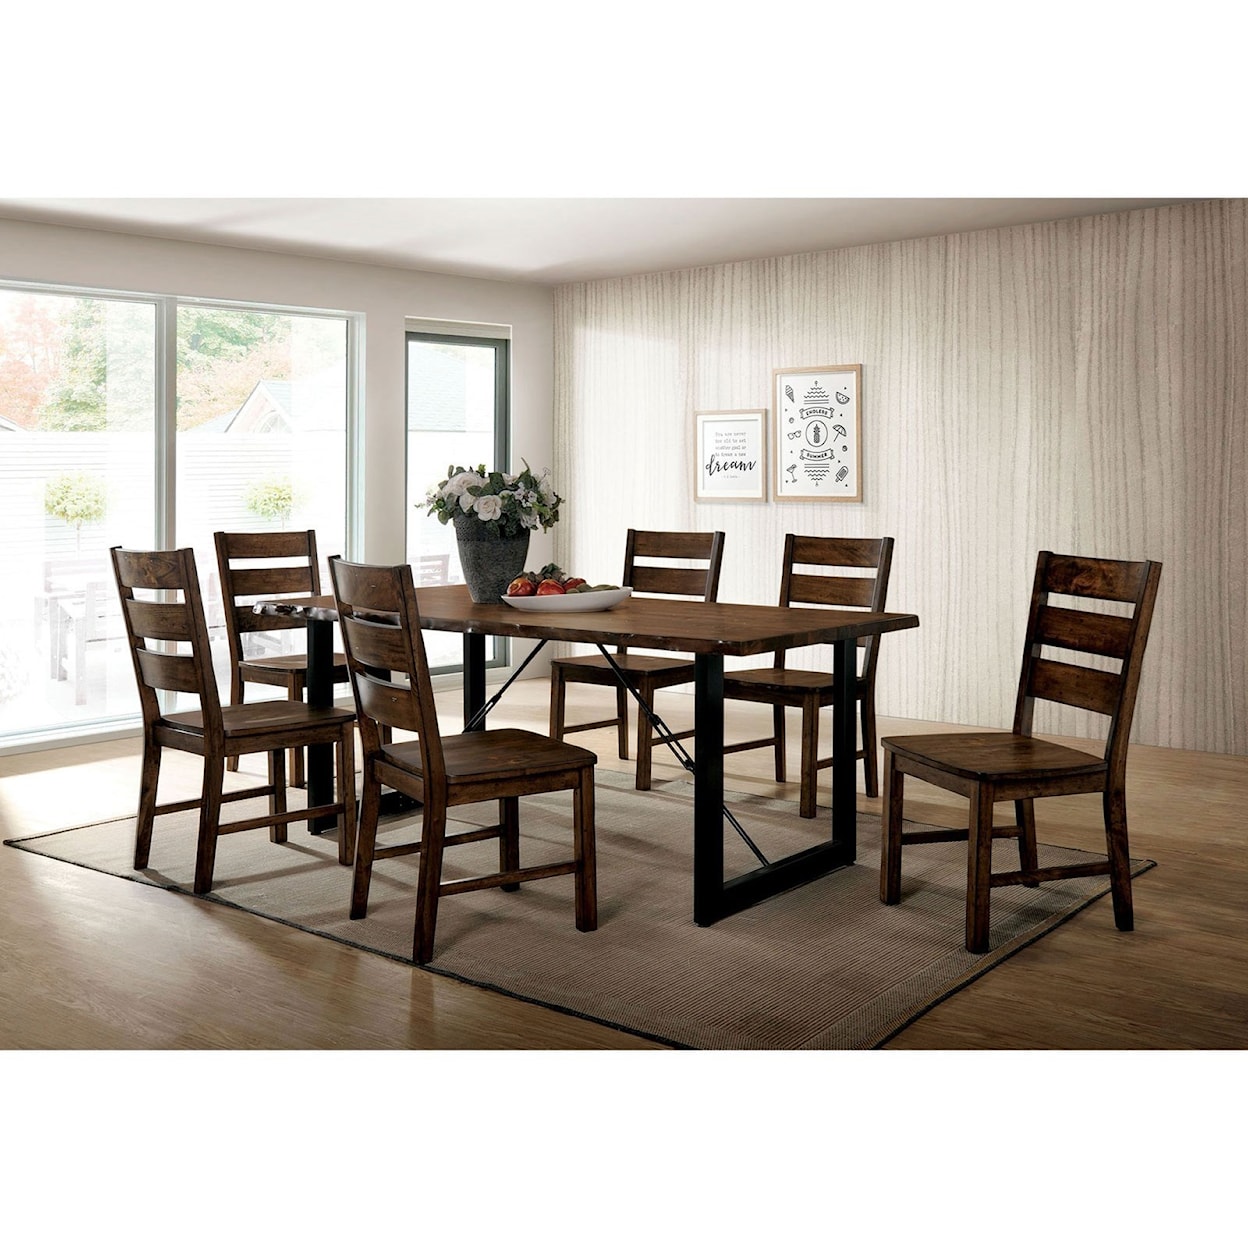 FUSA Dulce Dining Table